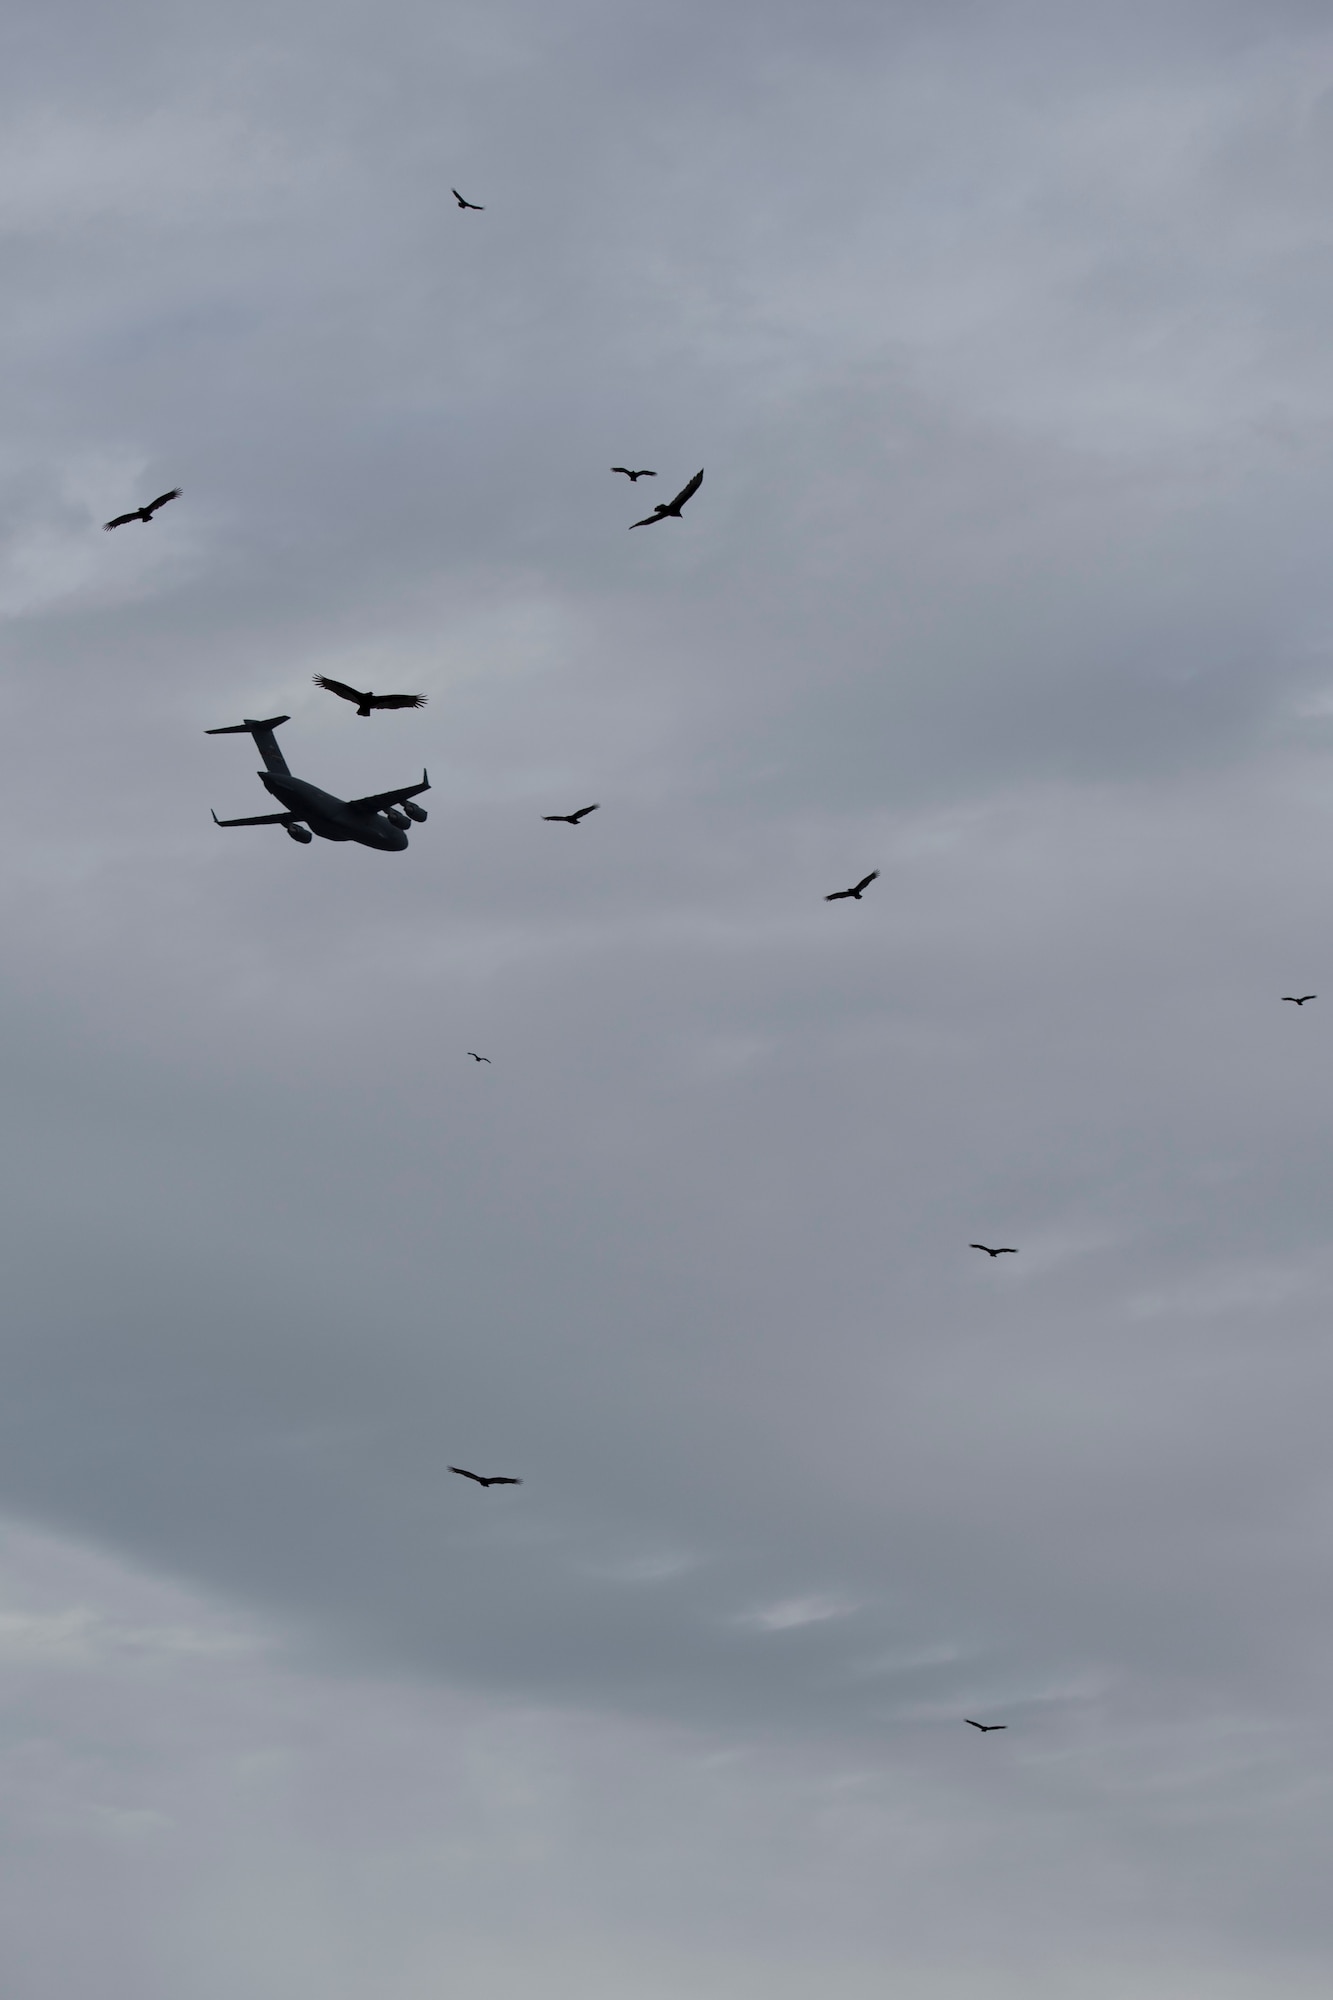 A C-17 Globemaster III aircraft assigned to the 167th Airlift Wing flies above a group of vultures soaring in thermals over Argos Cement Plant in Martinsburg, W.Va., Nov. 8, 2018. The black vultures have been roosting at the plant for more than a year posing a threat to local aviation. The 167th AW has teamed up with the USDA and Argos Cement Plant to research the behaviors of the vultures to help mitigate the aviation threats. (U.S. Air National Guard photo by Senior Master Sgt. Emily Beightol-Deyerle)